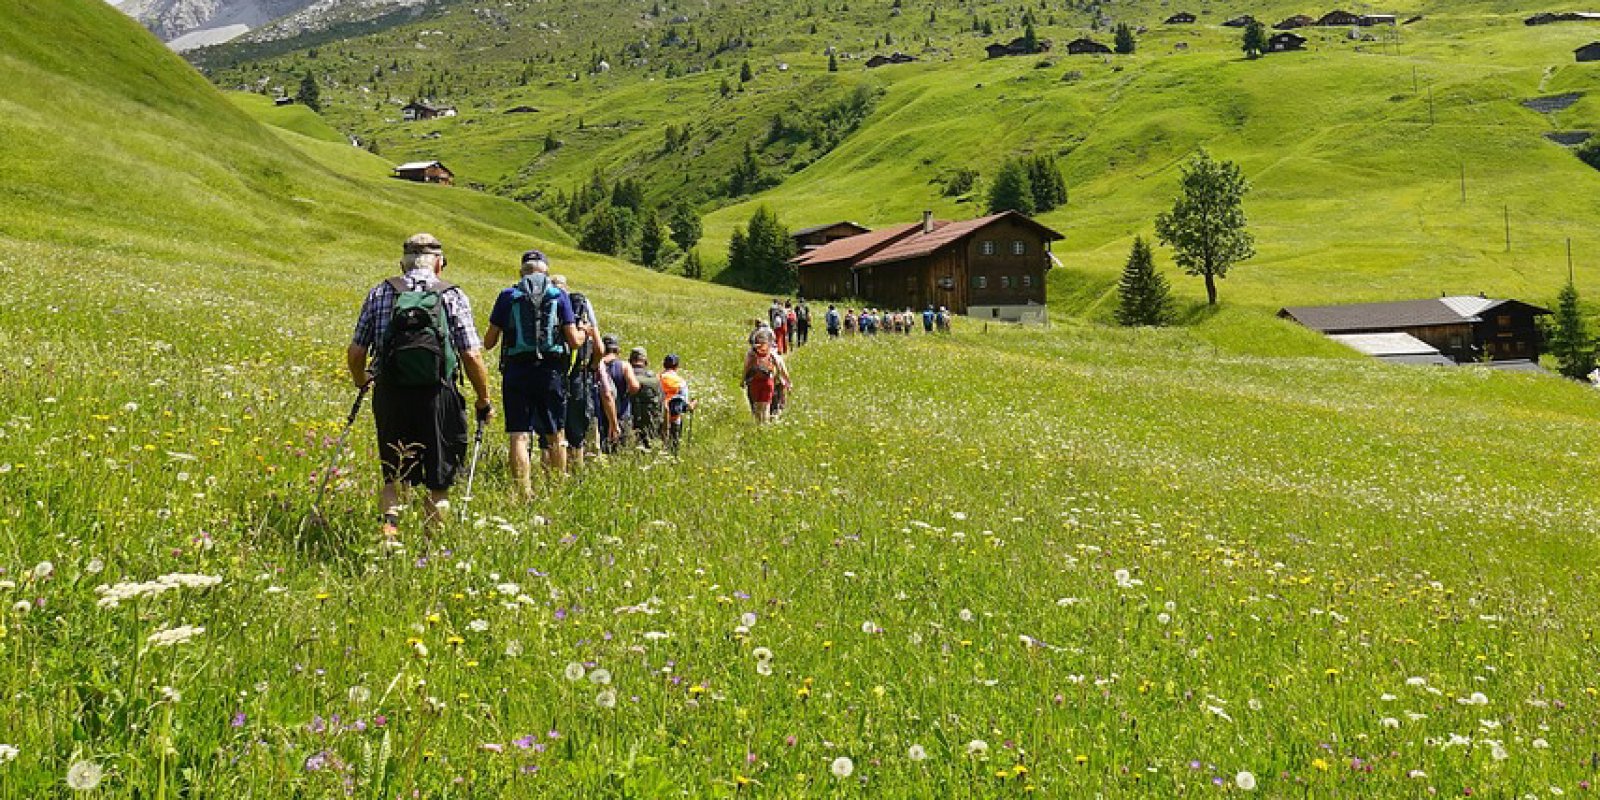 TREKKING IN VAL DI SOLE: ENJOY THE MOUNTAINS ON FOOT